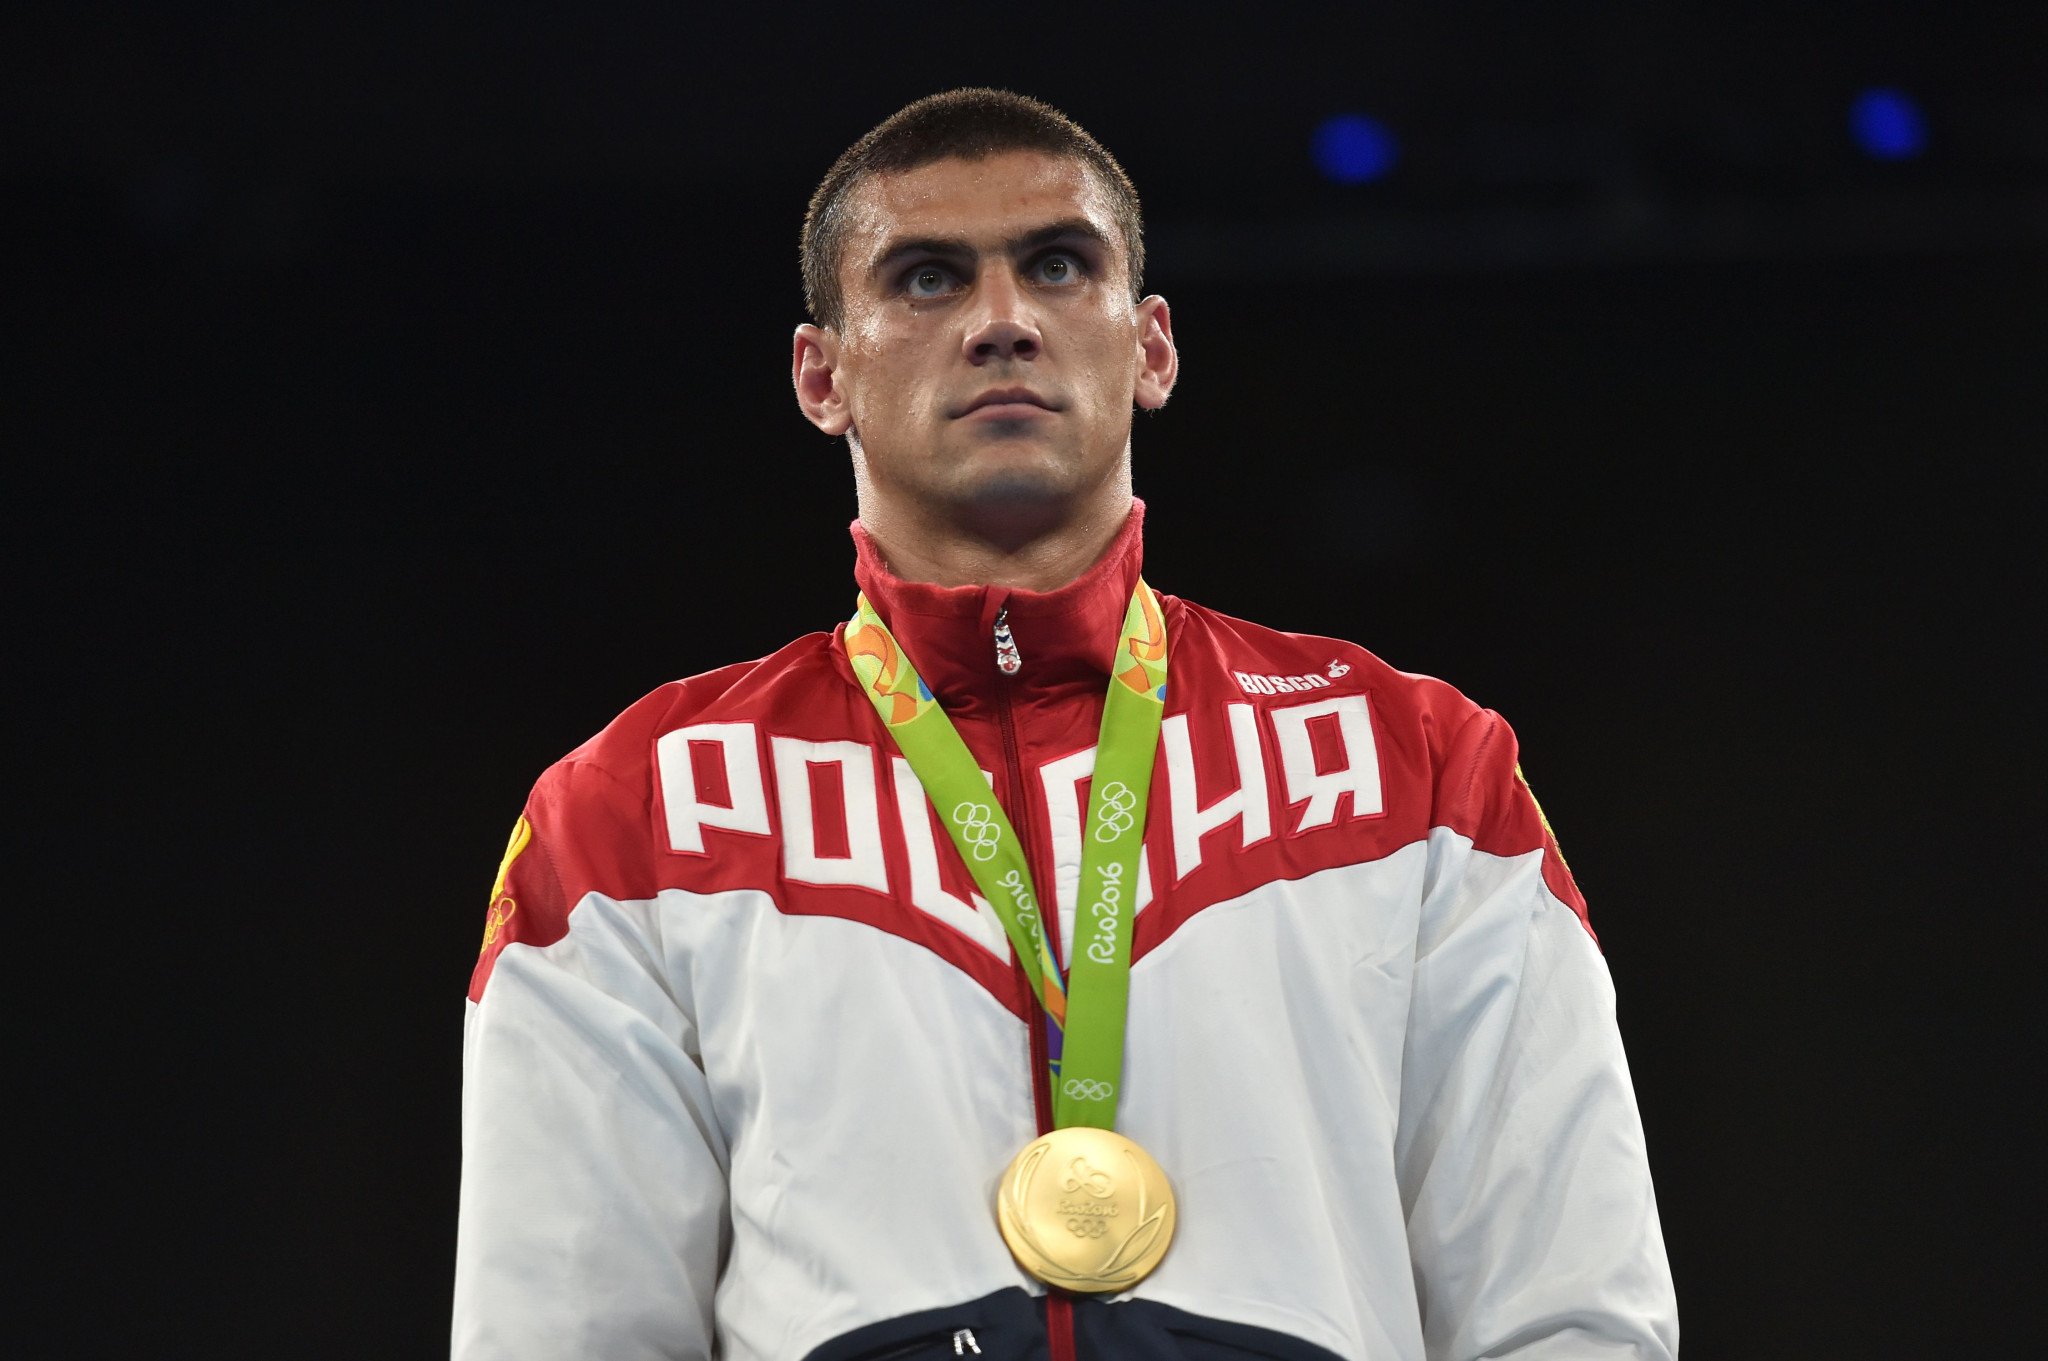 Olympic boxing champion Evgeny Tishchenko had to reject claims he had coronavirus ©Getty Images